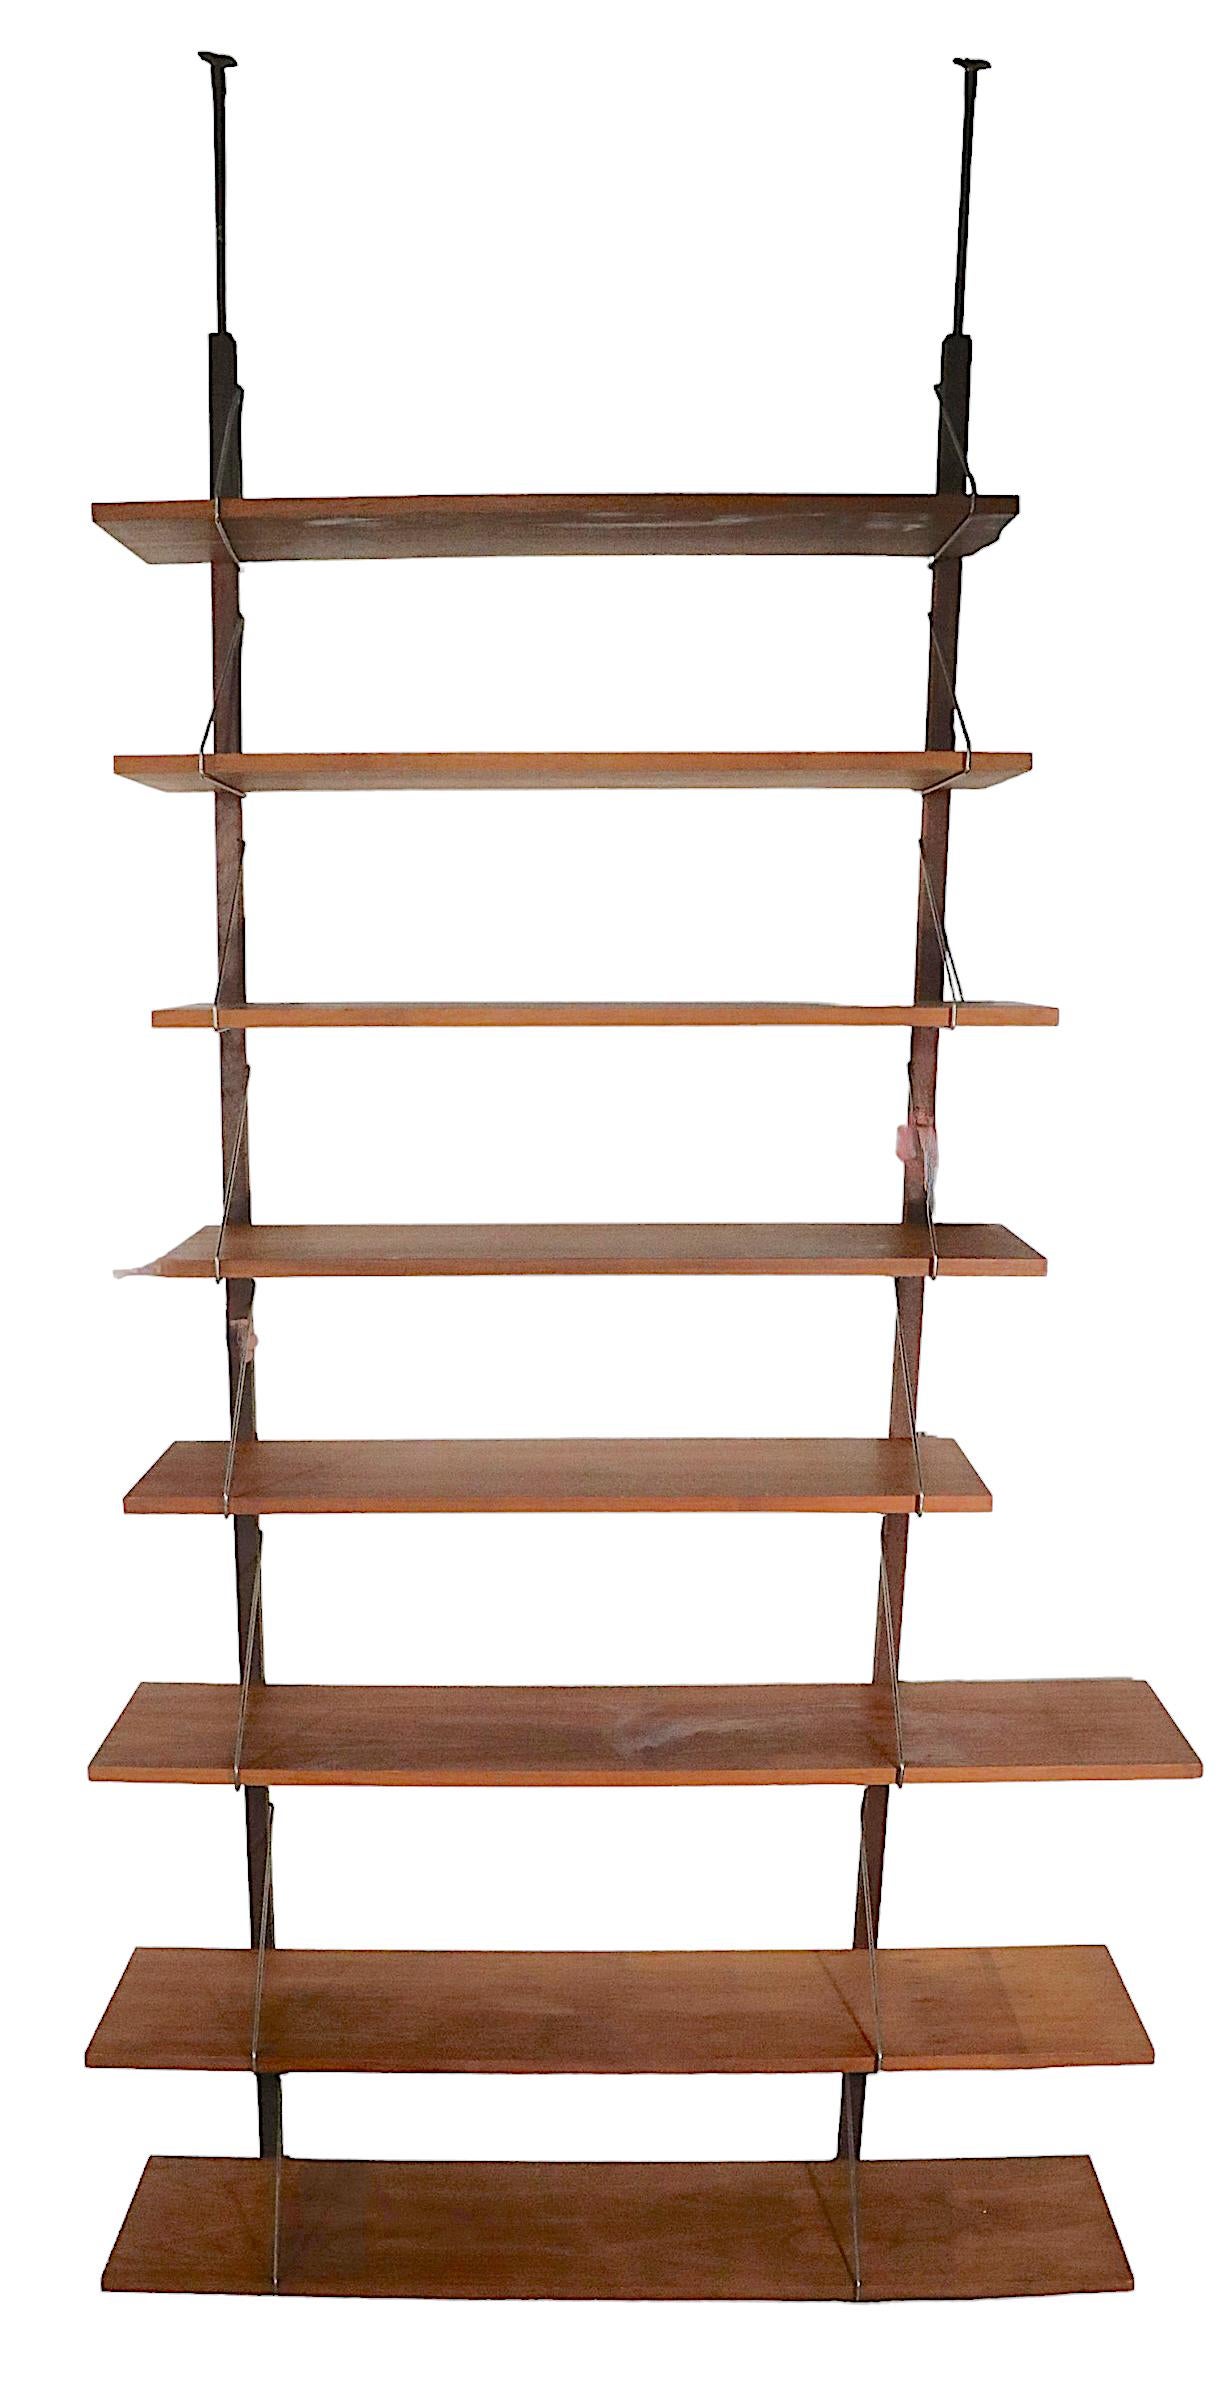 Wood Danish Mid Century Wall Unit with 8 Shelves, circa 1950 - 1960s For Sale